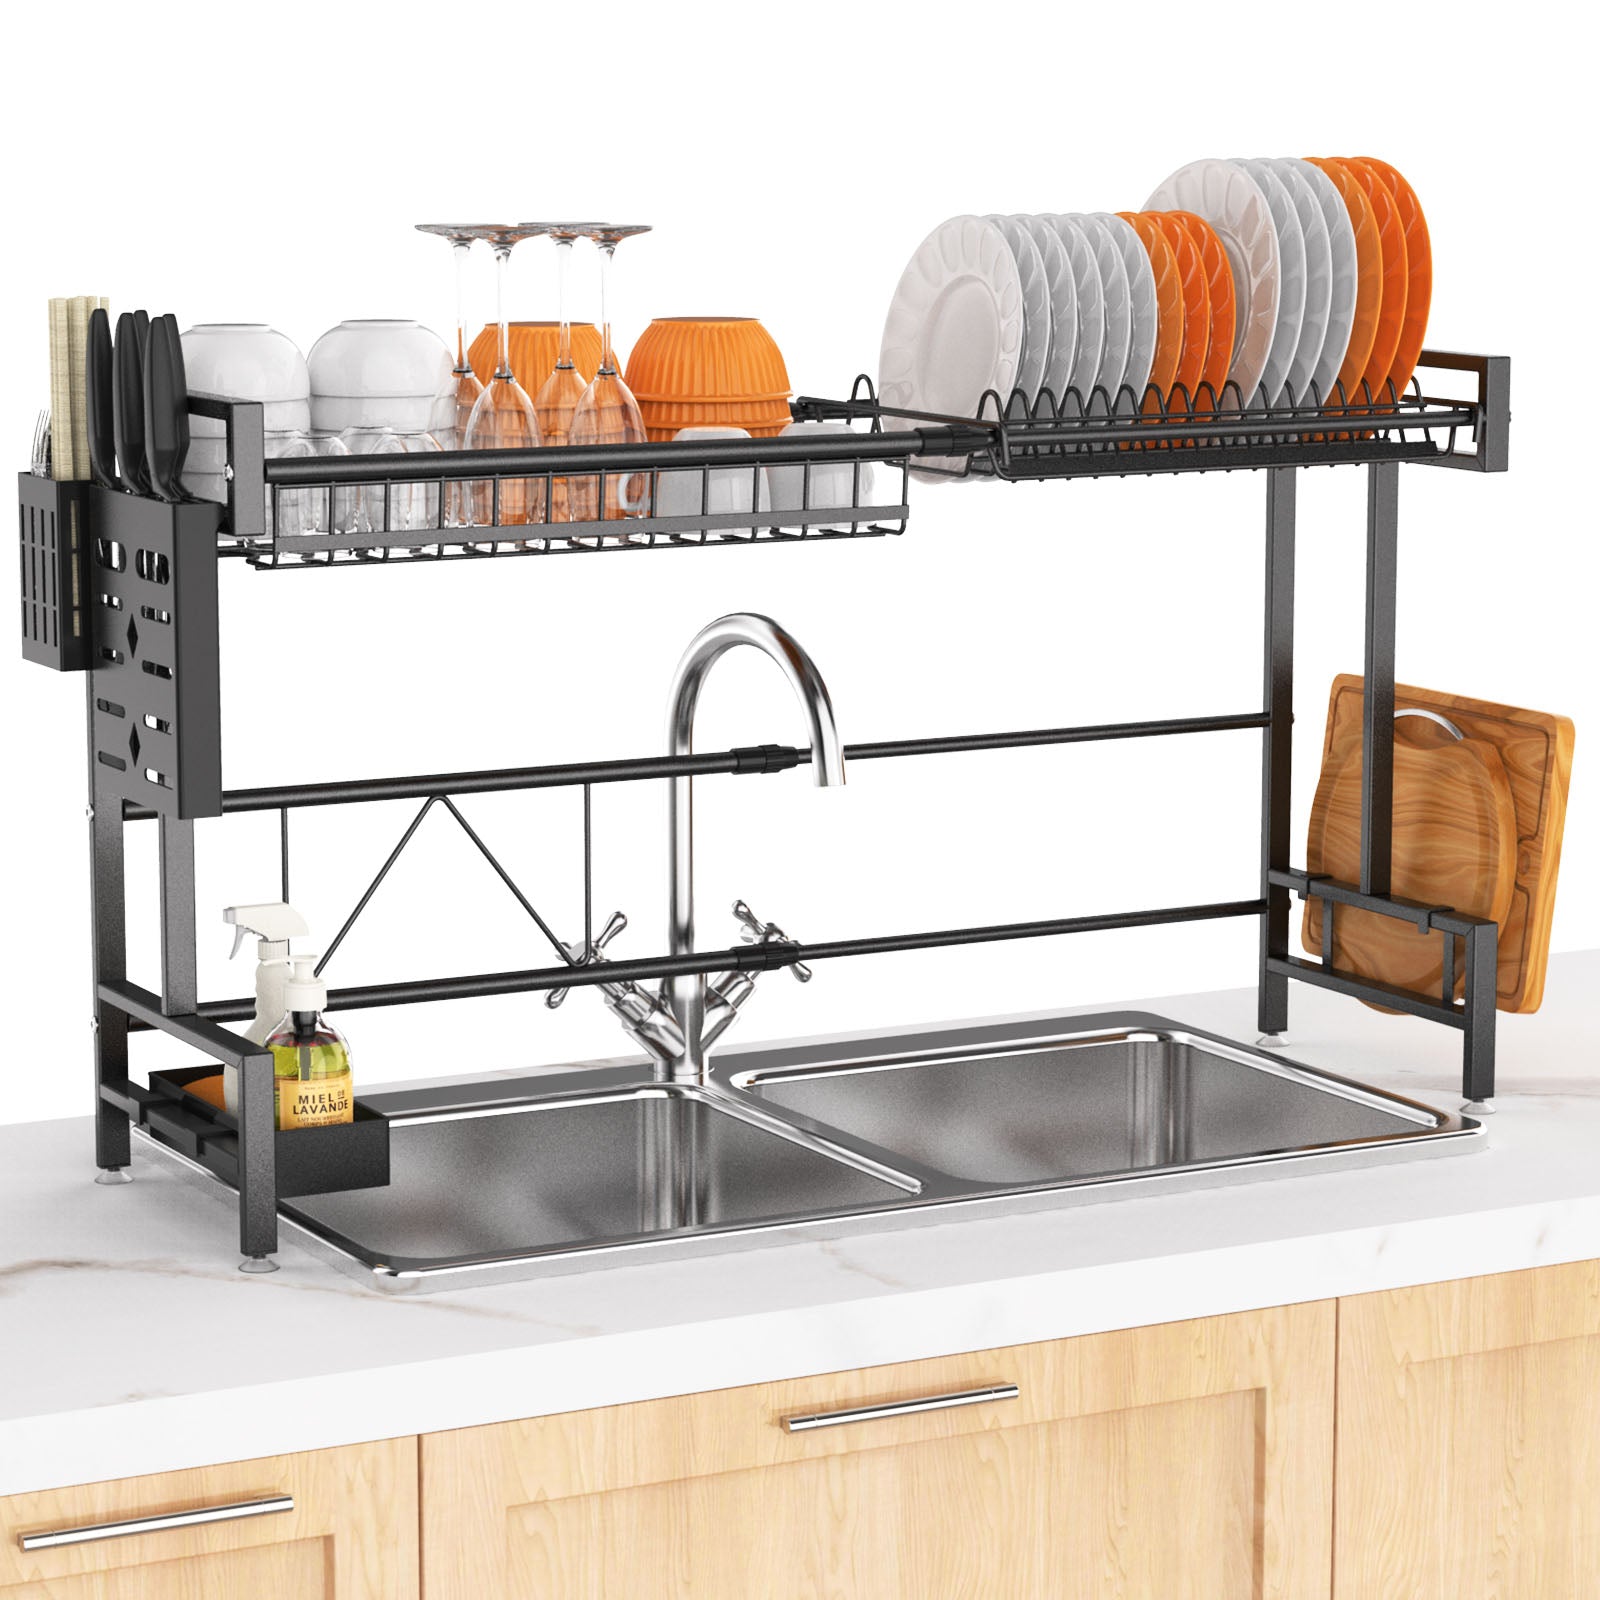 Dish Drying Rack, Dish Racks for Kitchen Counter, Stainless Steel